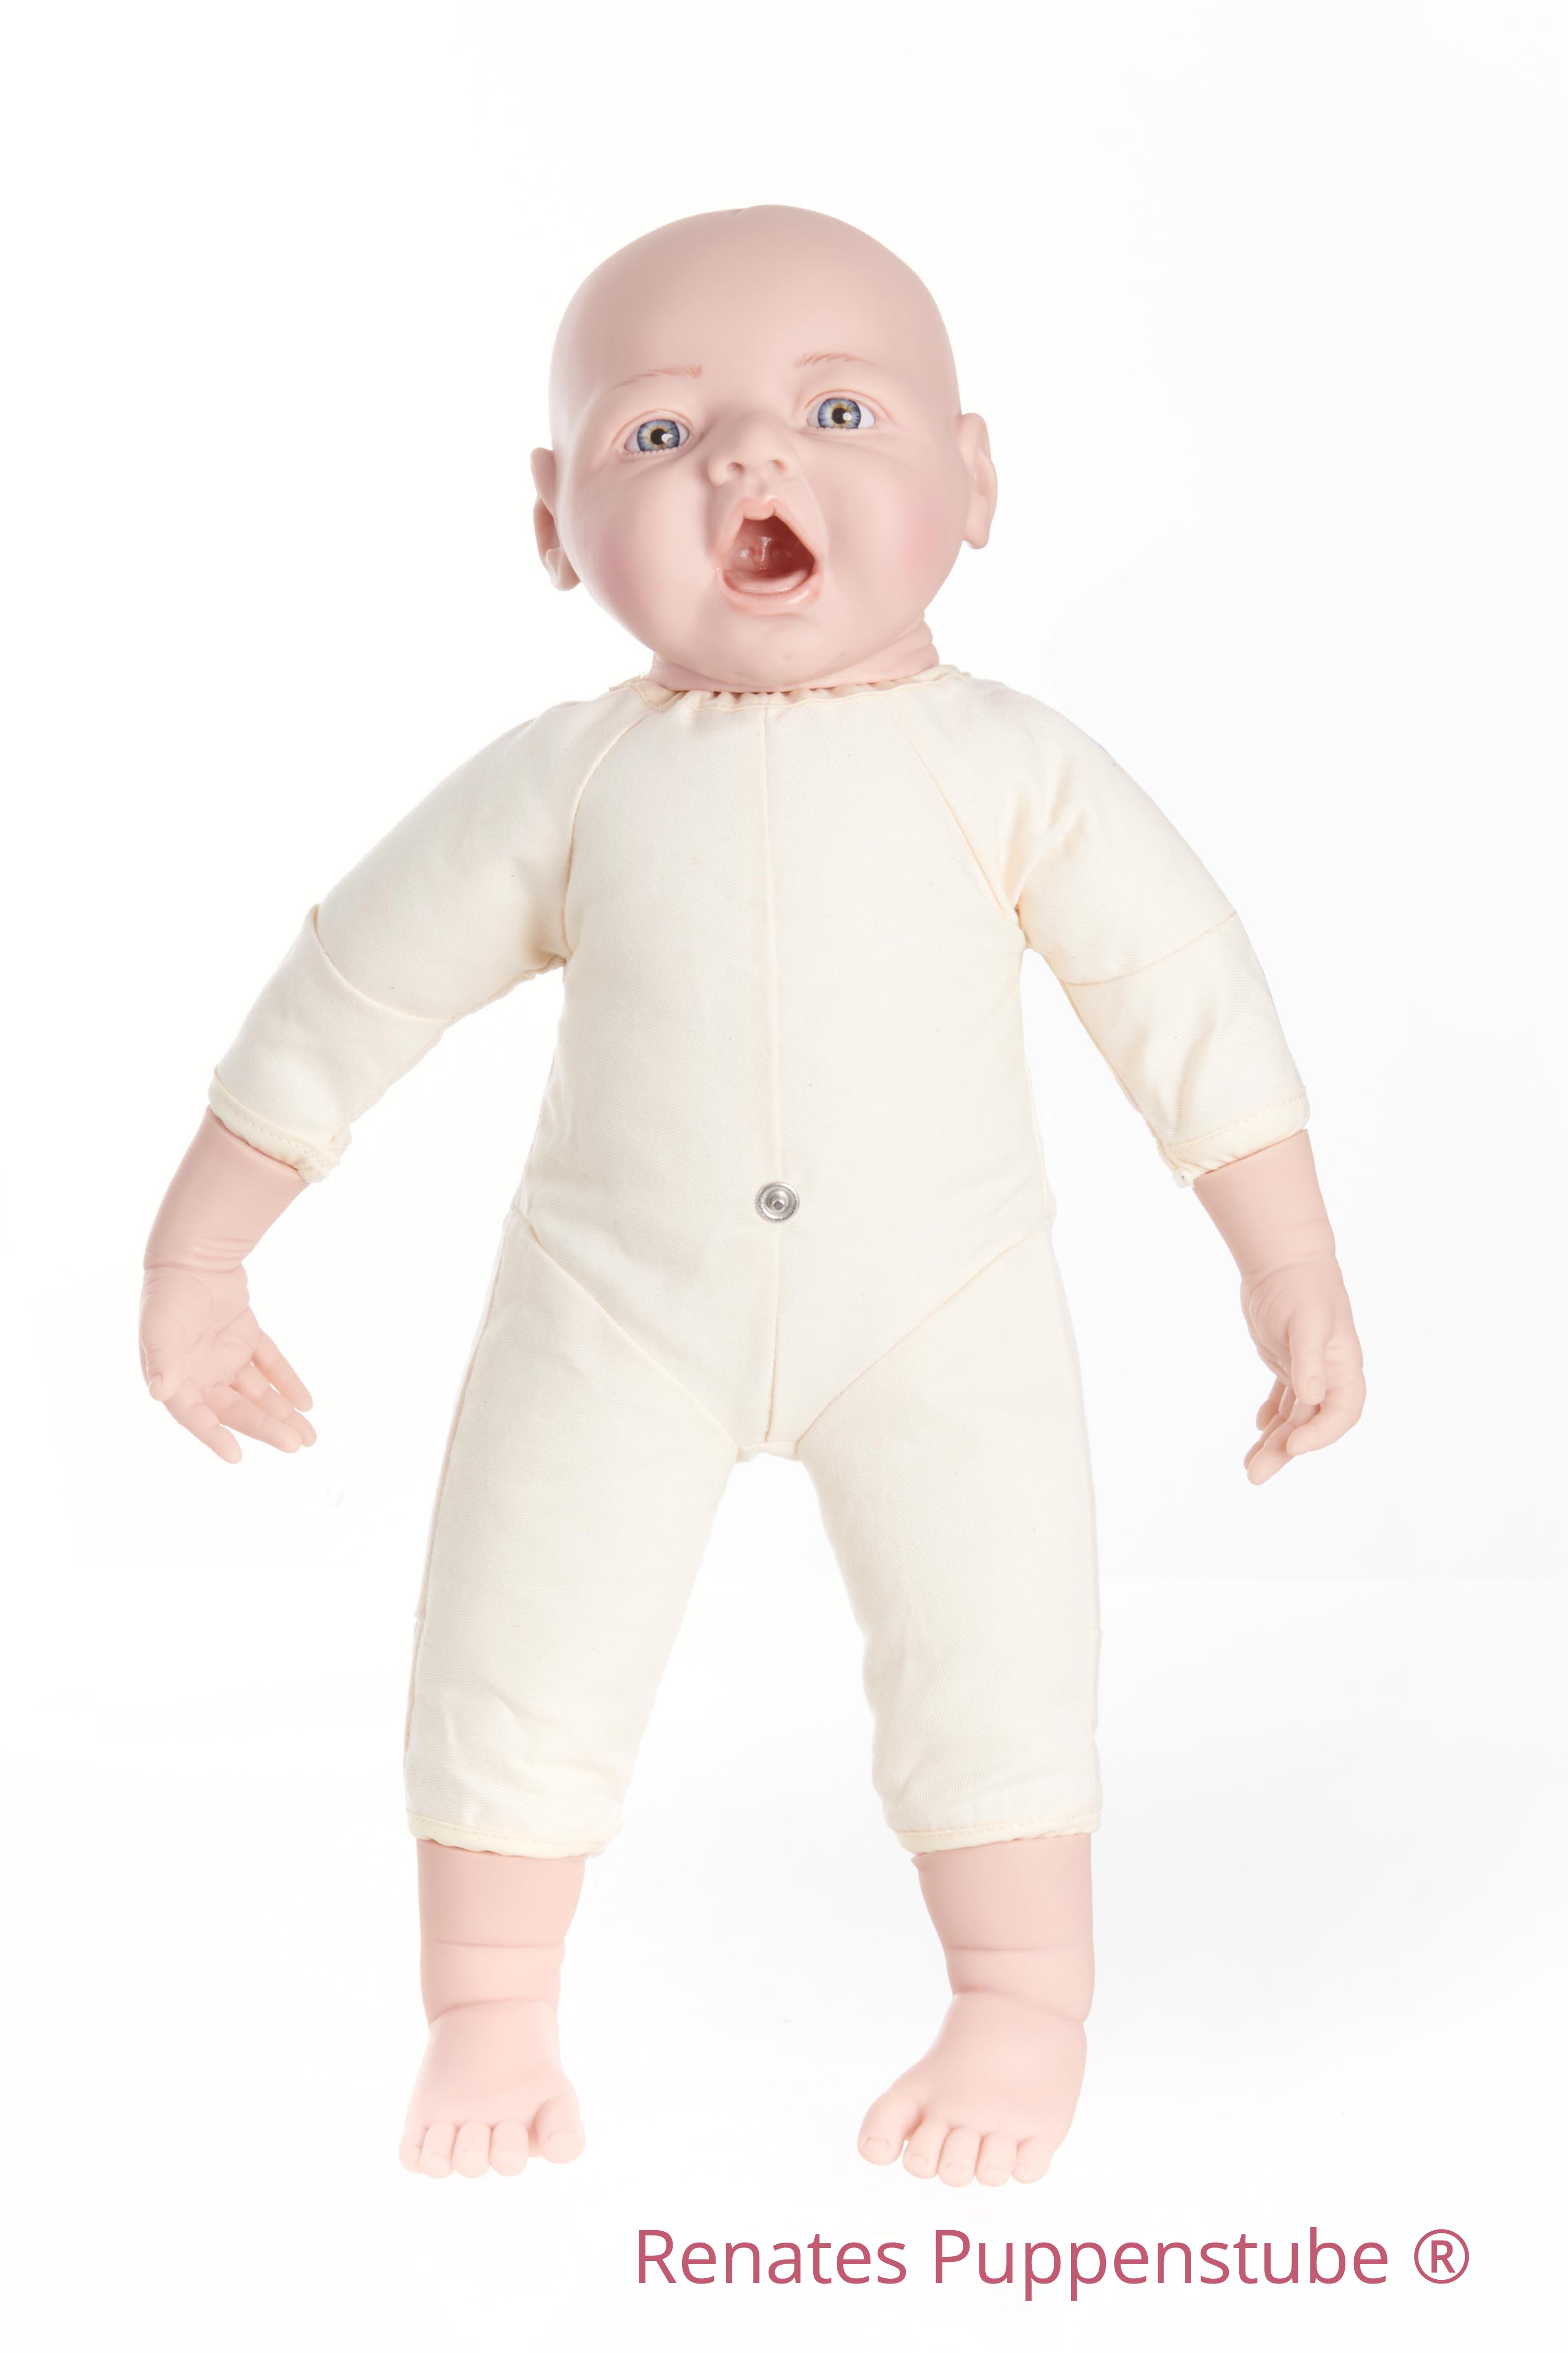 No 44363 Foetus doll with mouth for breast feeding, sutures and fontanelles,